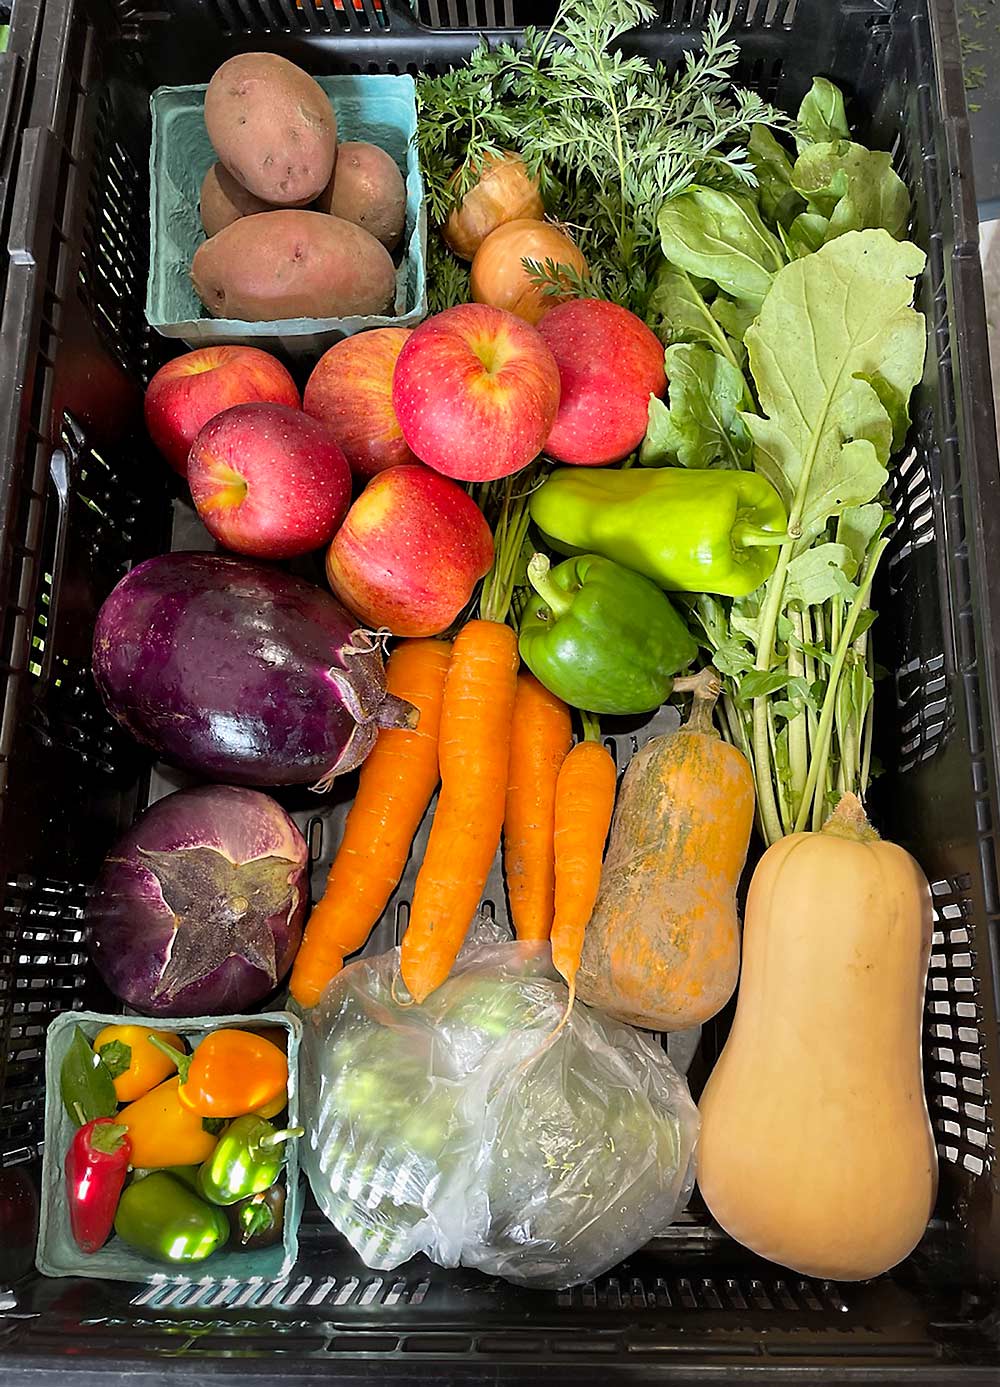 The “Grab & Go” share at Wickham Farms, including apples from the 5-acre U-pick orchard. This is the smallest share offered by the New York farm’s CSA program, which has expanded in the past couple of years. (Courtesy Debbie Wickham)